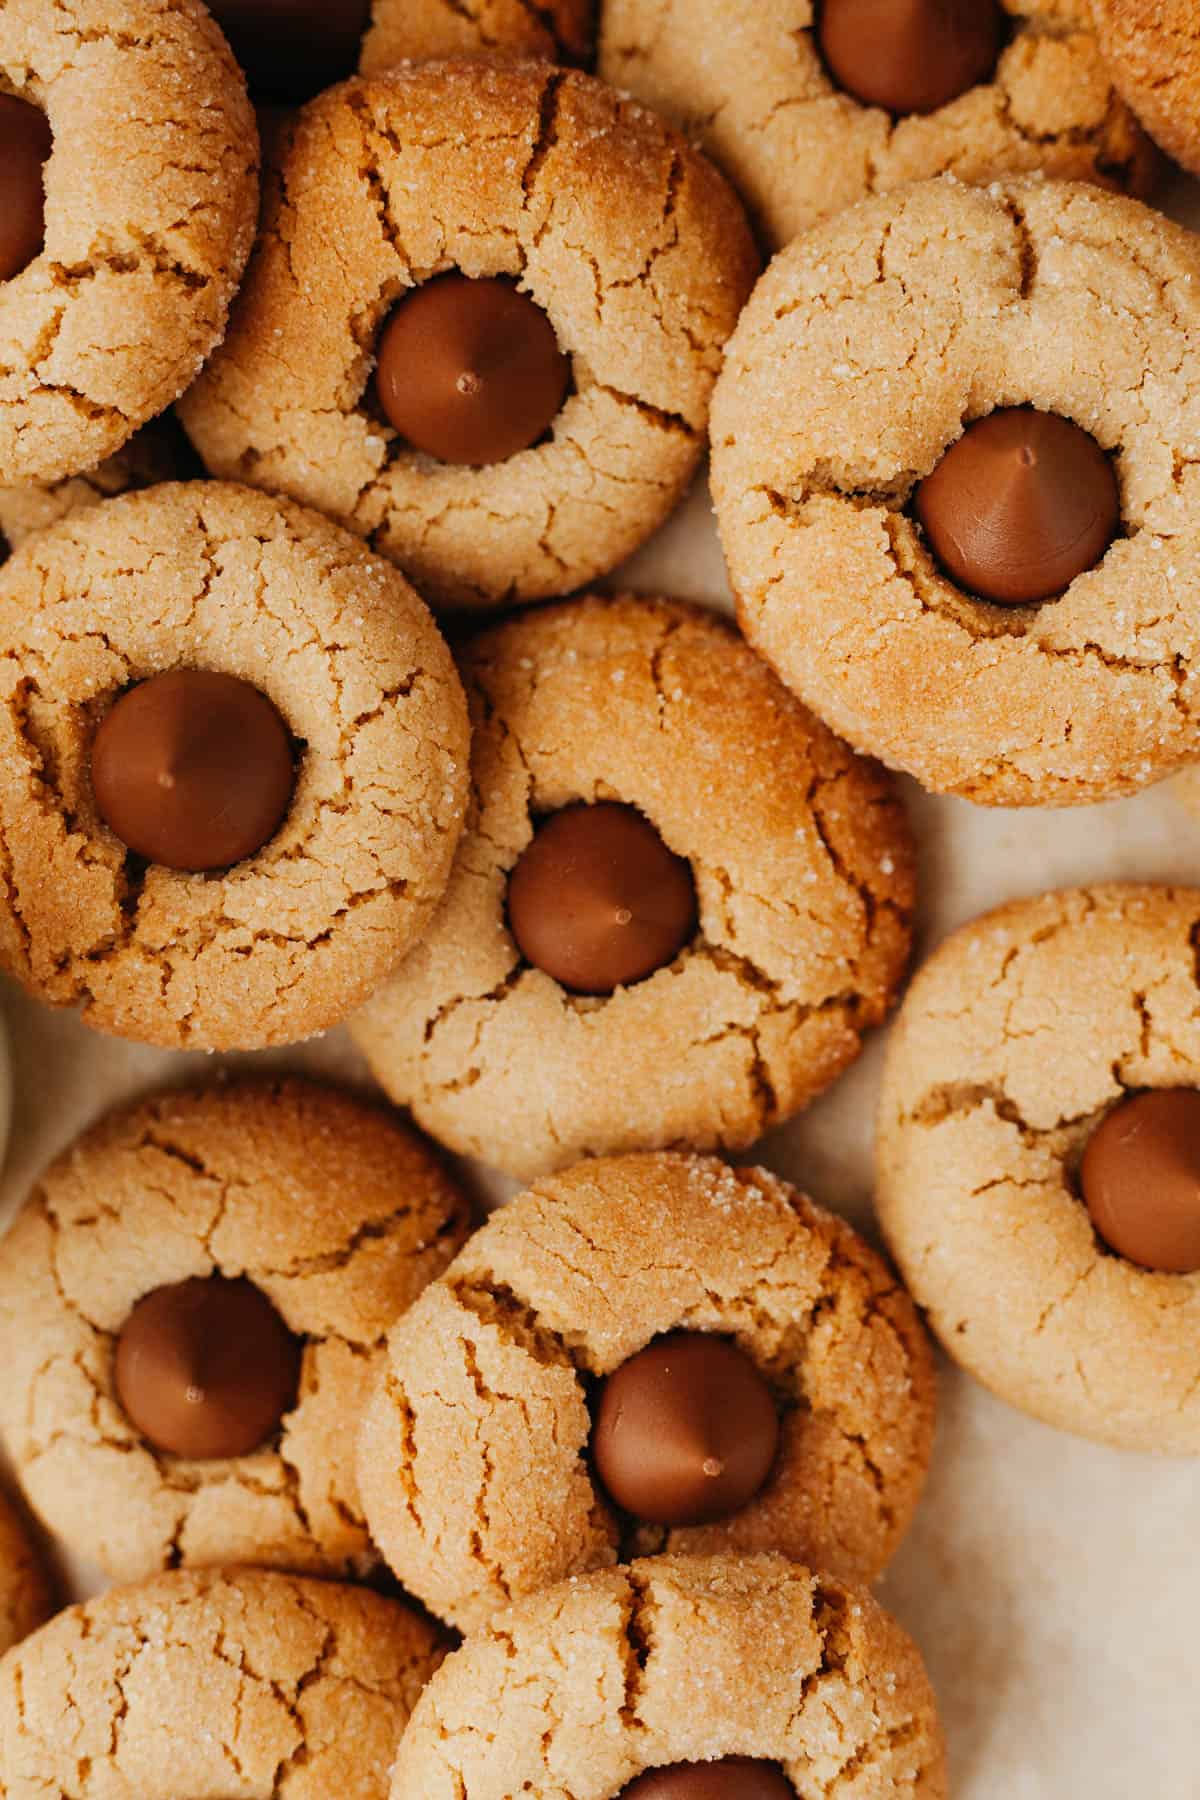 A close up of about 10 peanut butter blossom cookies.